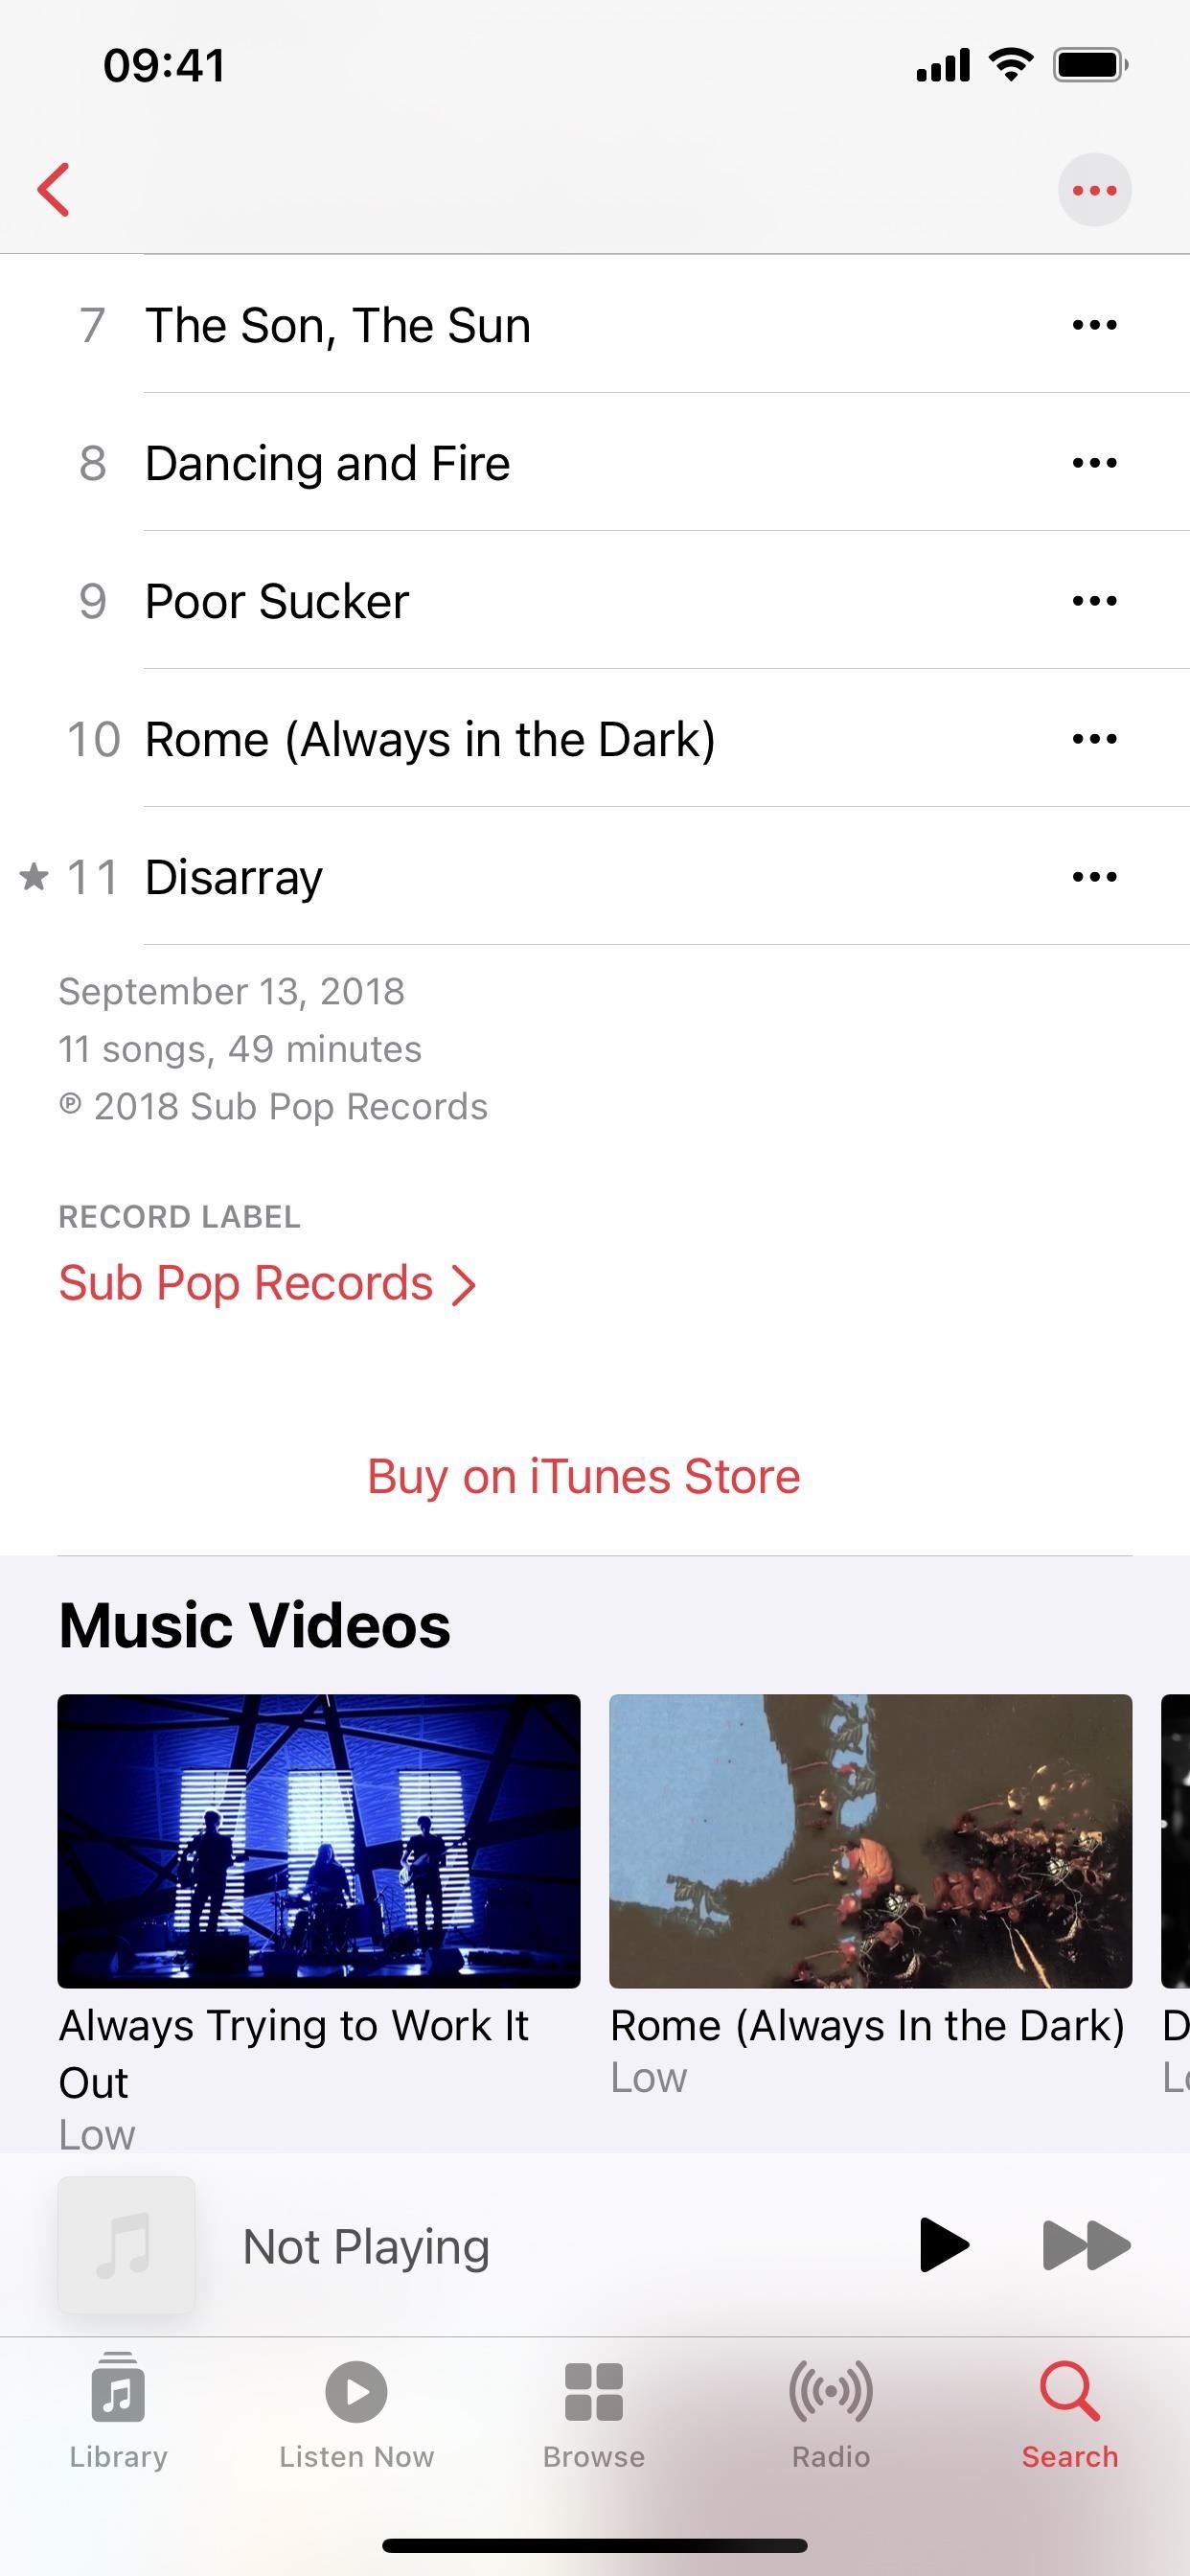 Search Apple Music by Record Label to Find Like-Minded Artists & Albums